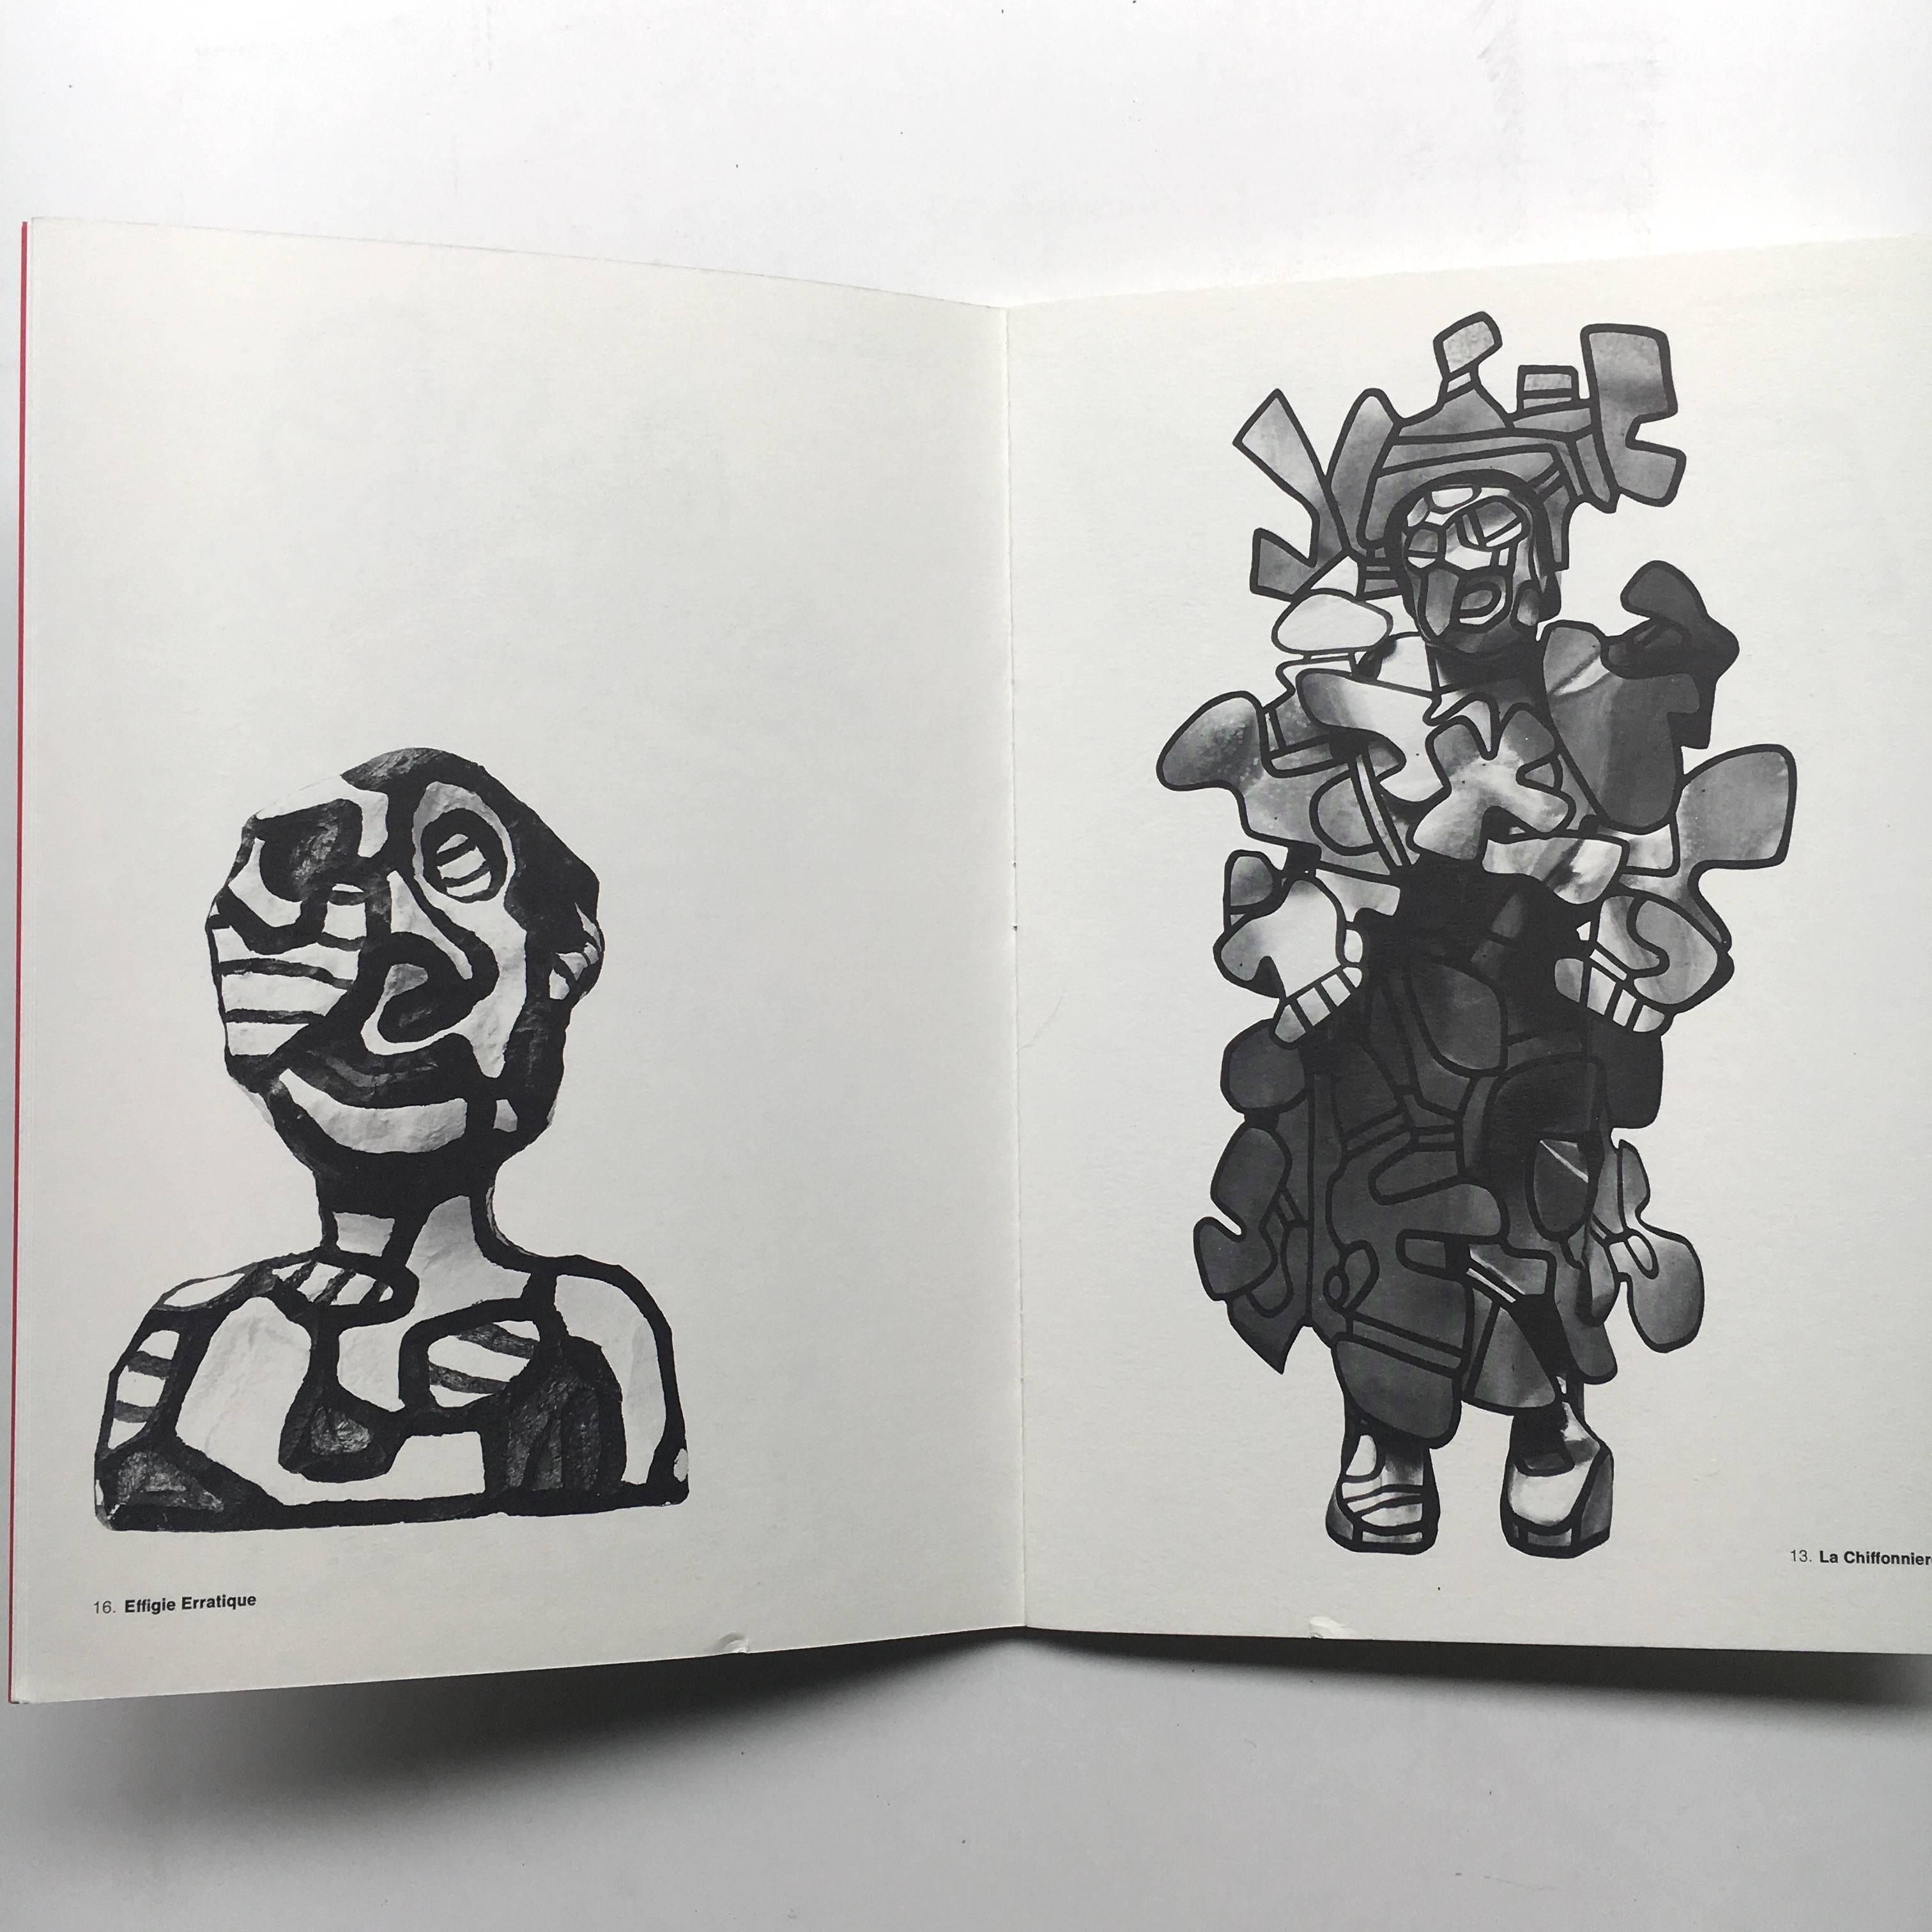 First edition, published by Pace Editions, 1973

A catalogue showcasing the unadulterated style of Dubuffet, a pioneer of 'art brut', published in conjunction with an exhibition held at the Pace Gallery, New York, in 1973. Featuring full page